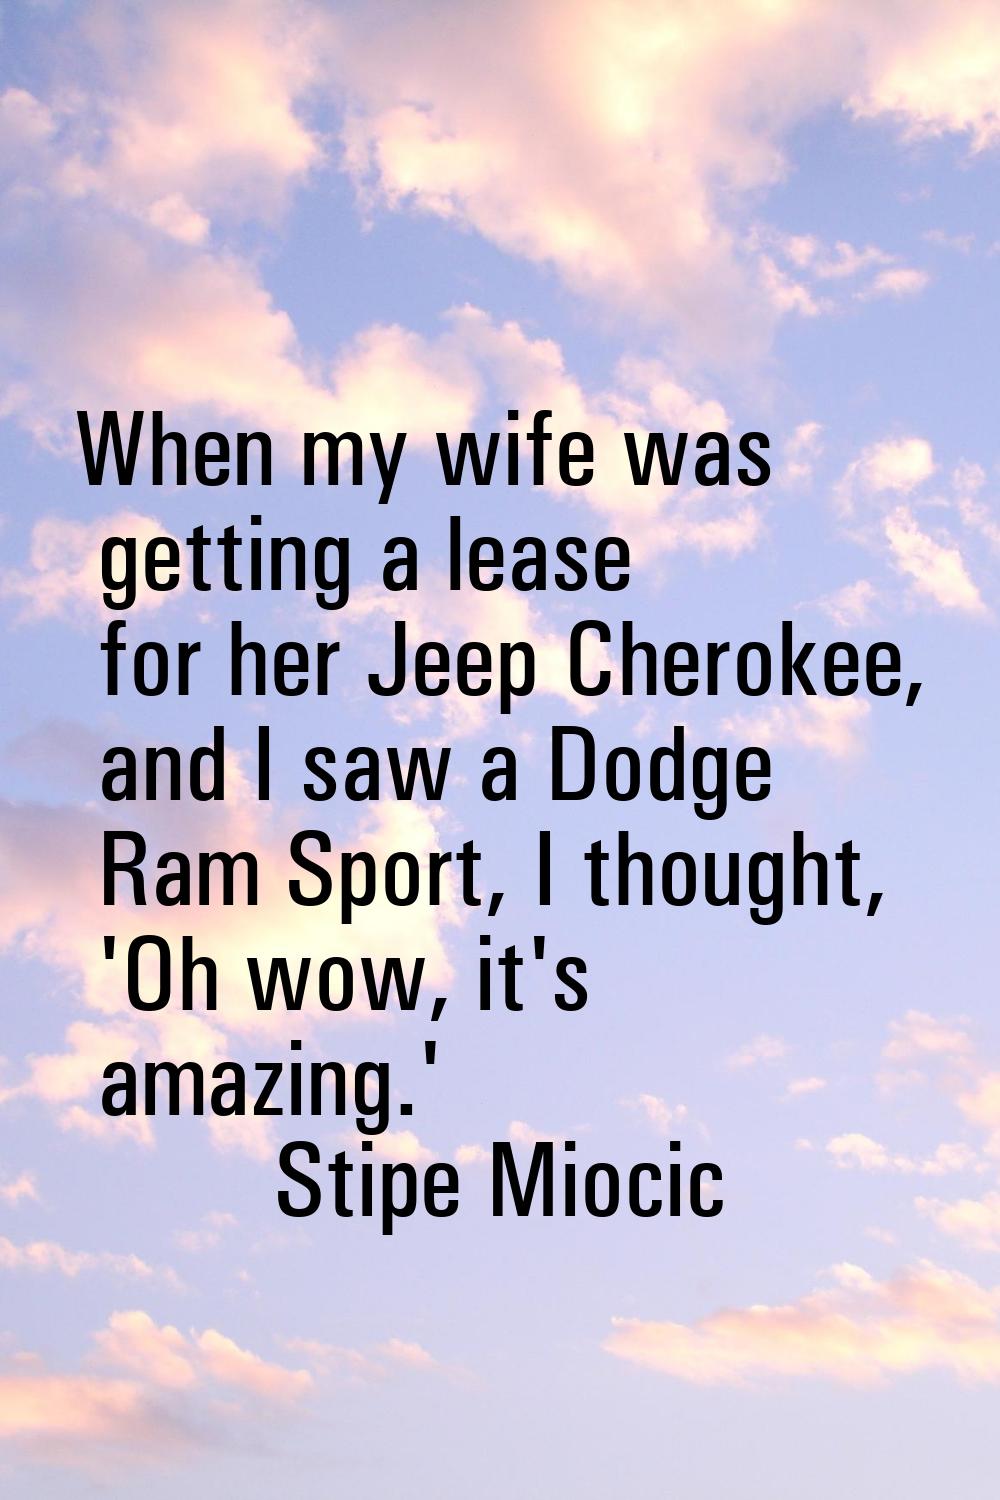 When my wife was getting a lease for her Jeep Cherokee, and I saw a Dodge Ram Sport, I thought, 'Oh